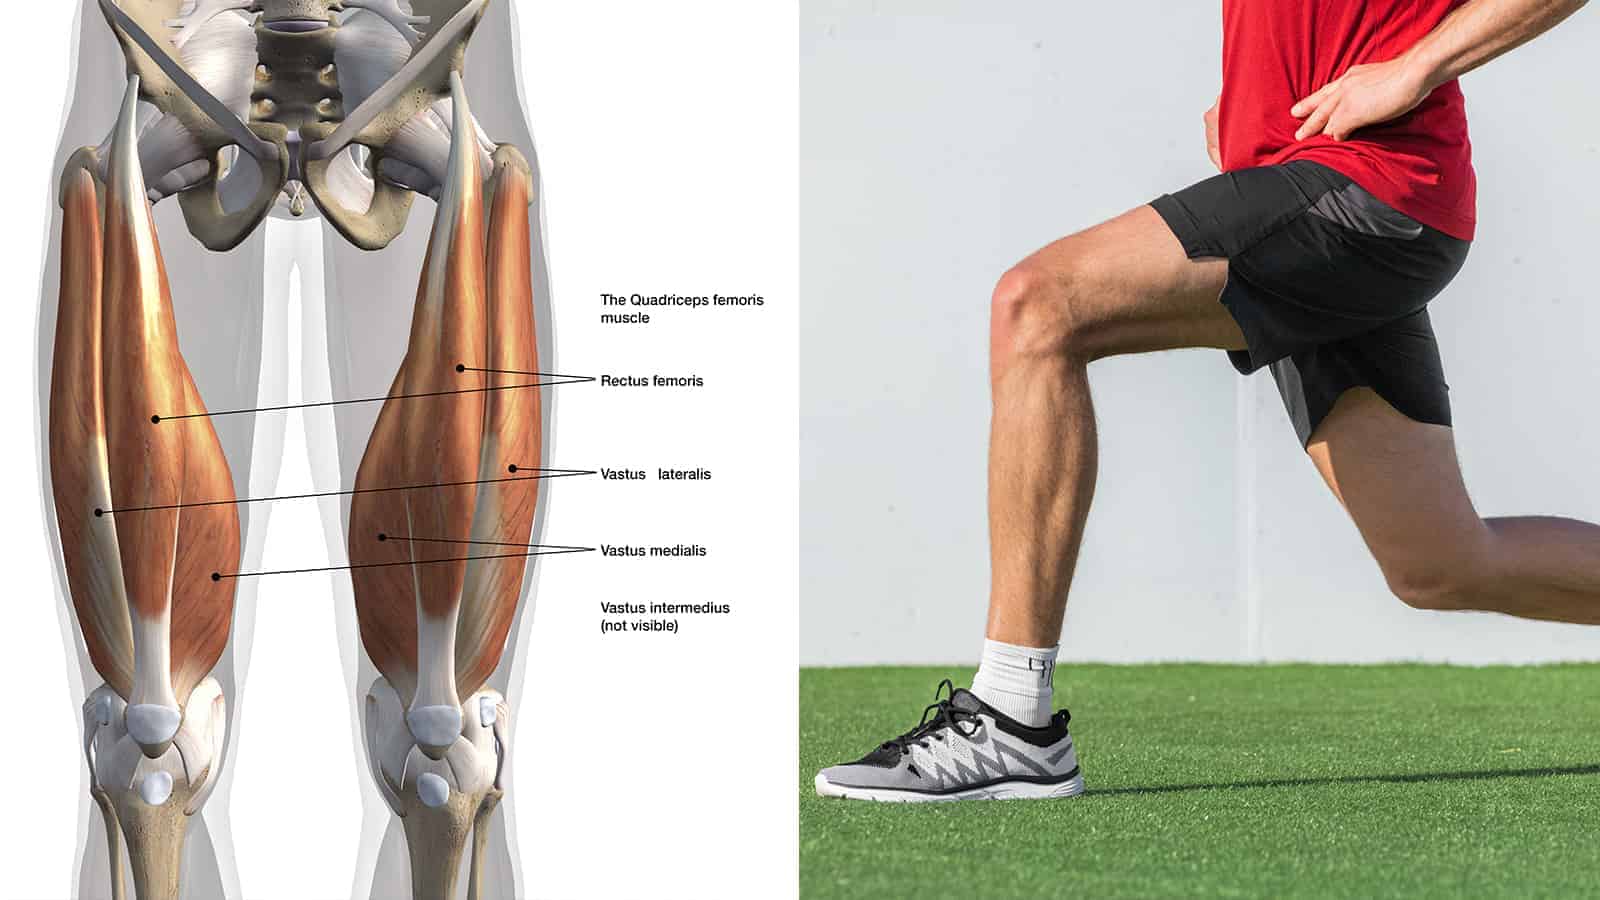 10 Quadriceps Exercises That Build Muscle Fast (Without Using the Gym)